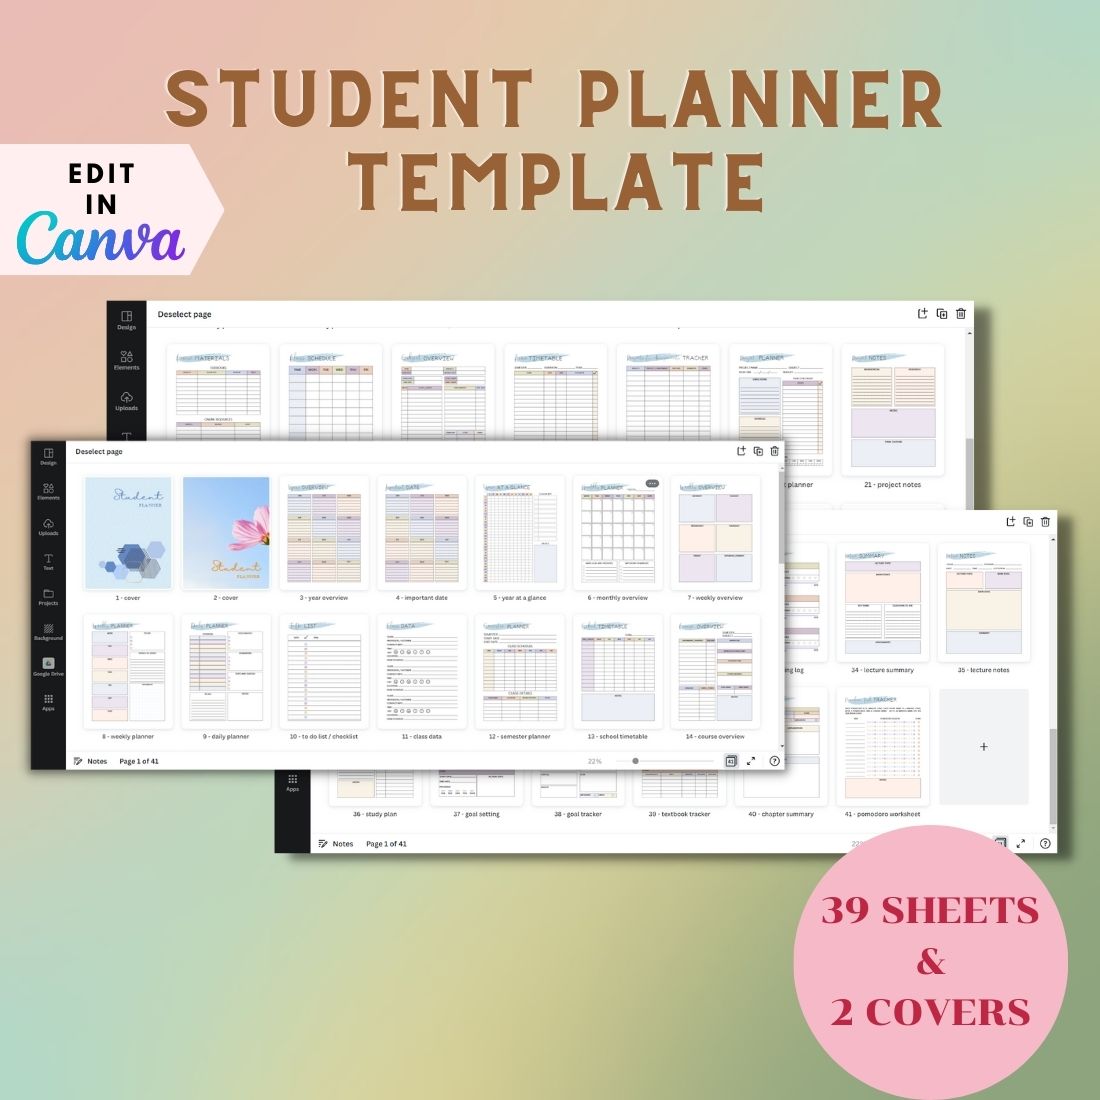 Student Planner Template - Editable by Canva preview image.